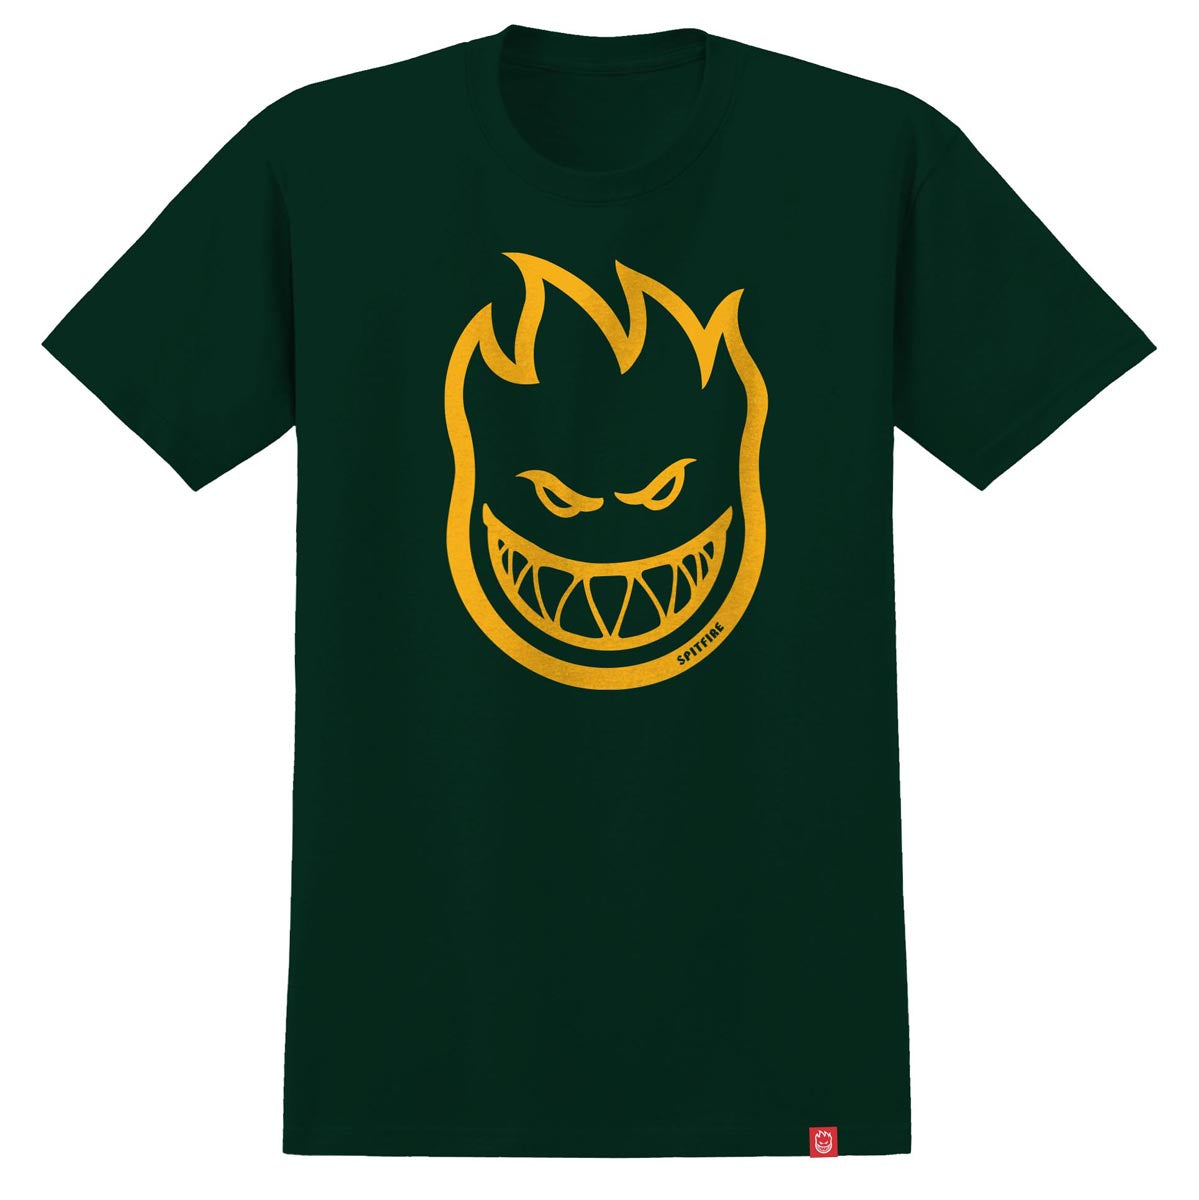 Spitfire Youth Bighead T-Shirt - Forest Green/Gold image 1